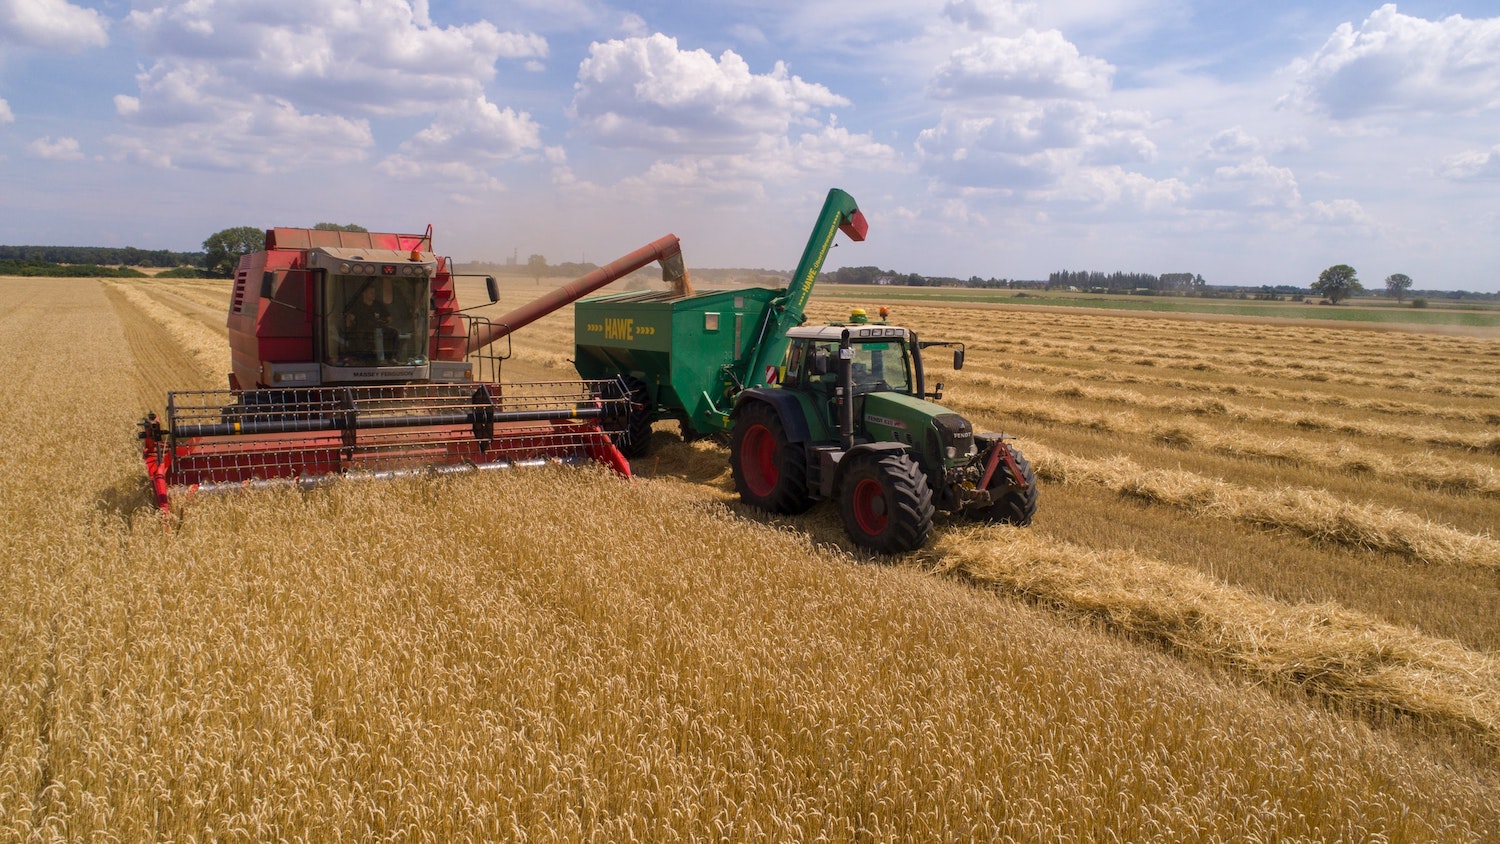 Tractor in a wheat field - How Animal Manure Could Help Reduce Agriculture's Carbon Footprint - - College of Natural Resources News NC State University